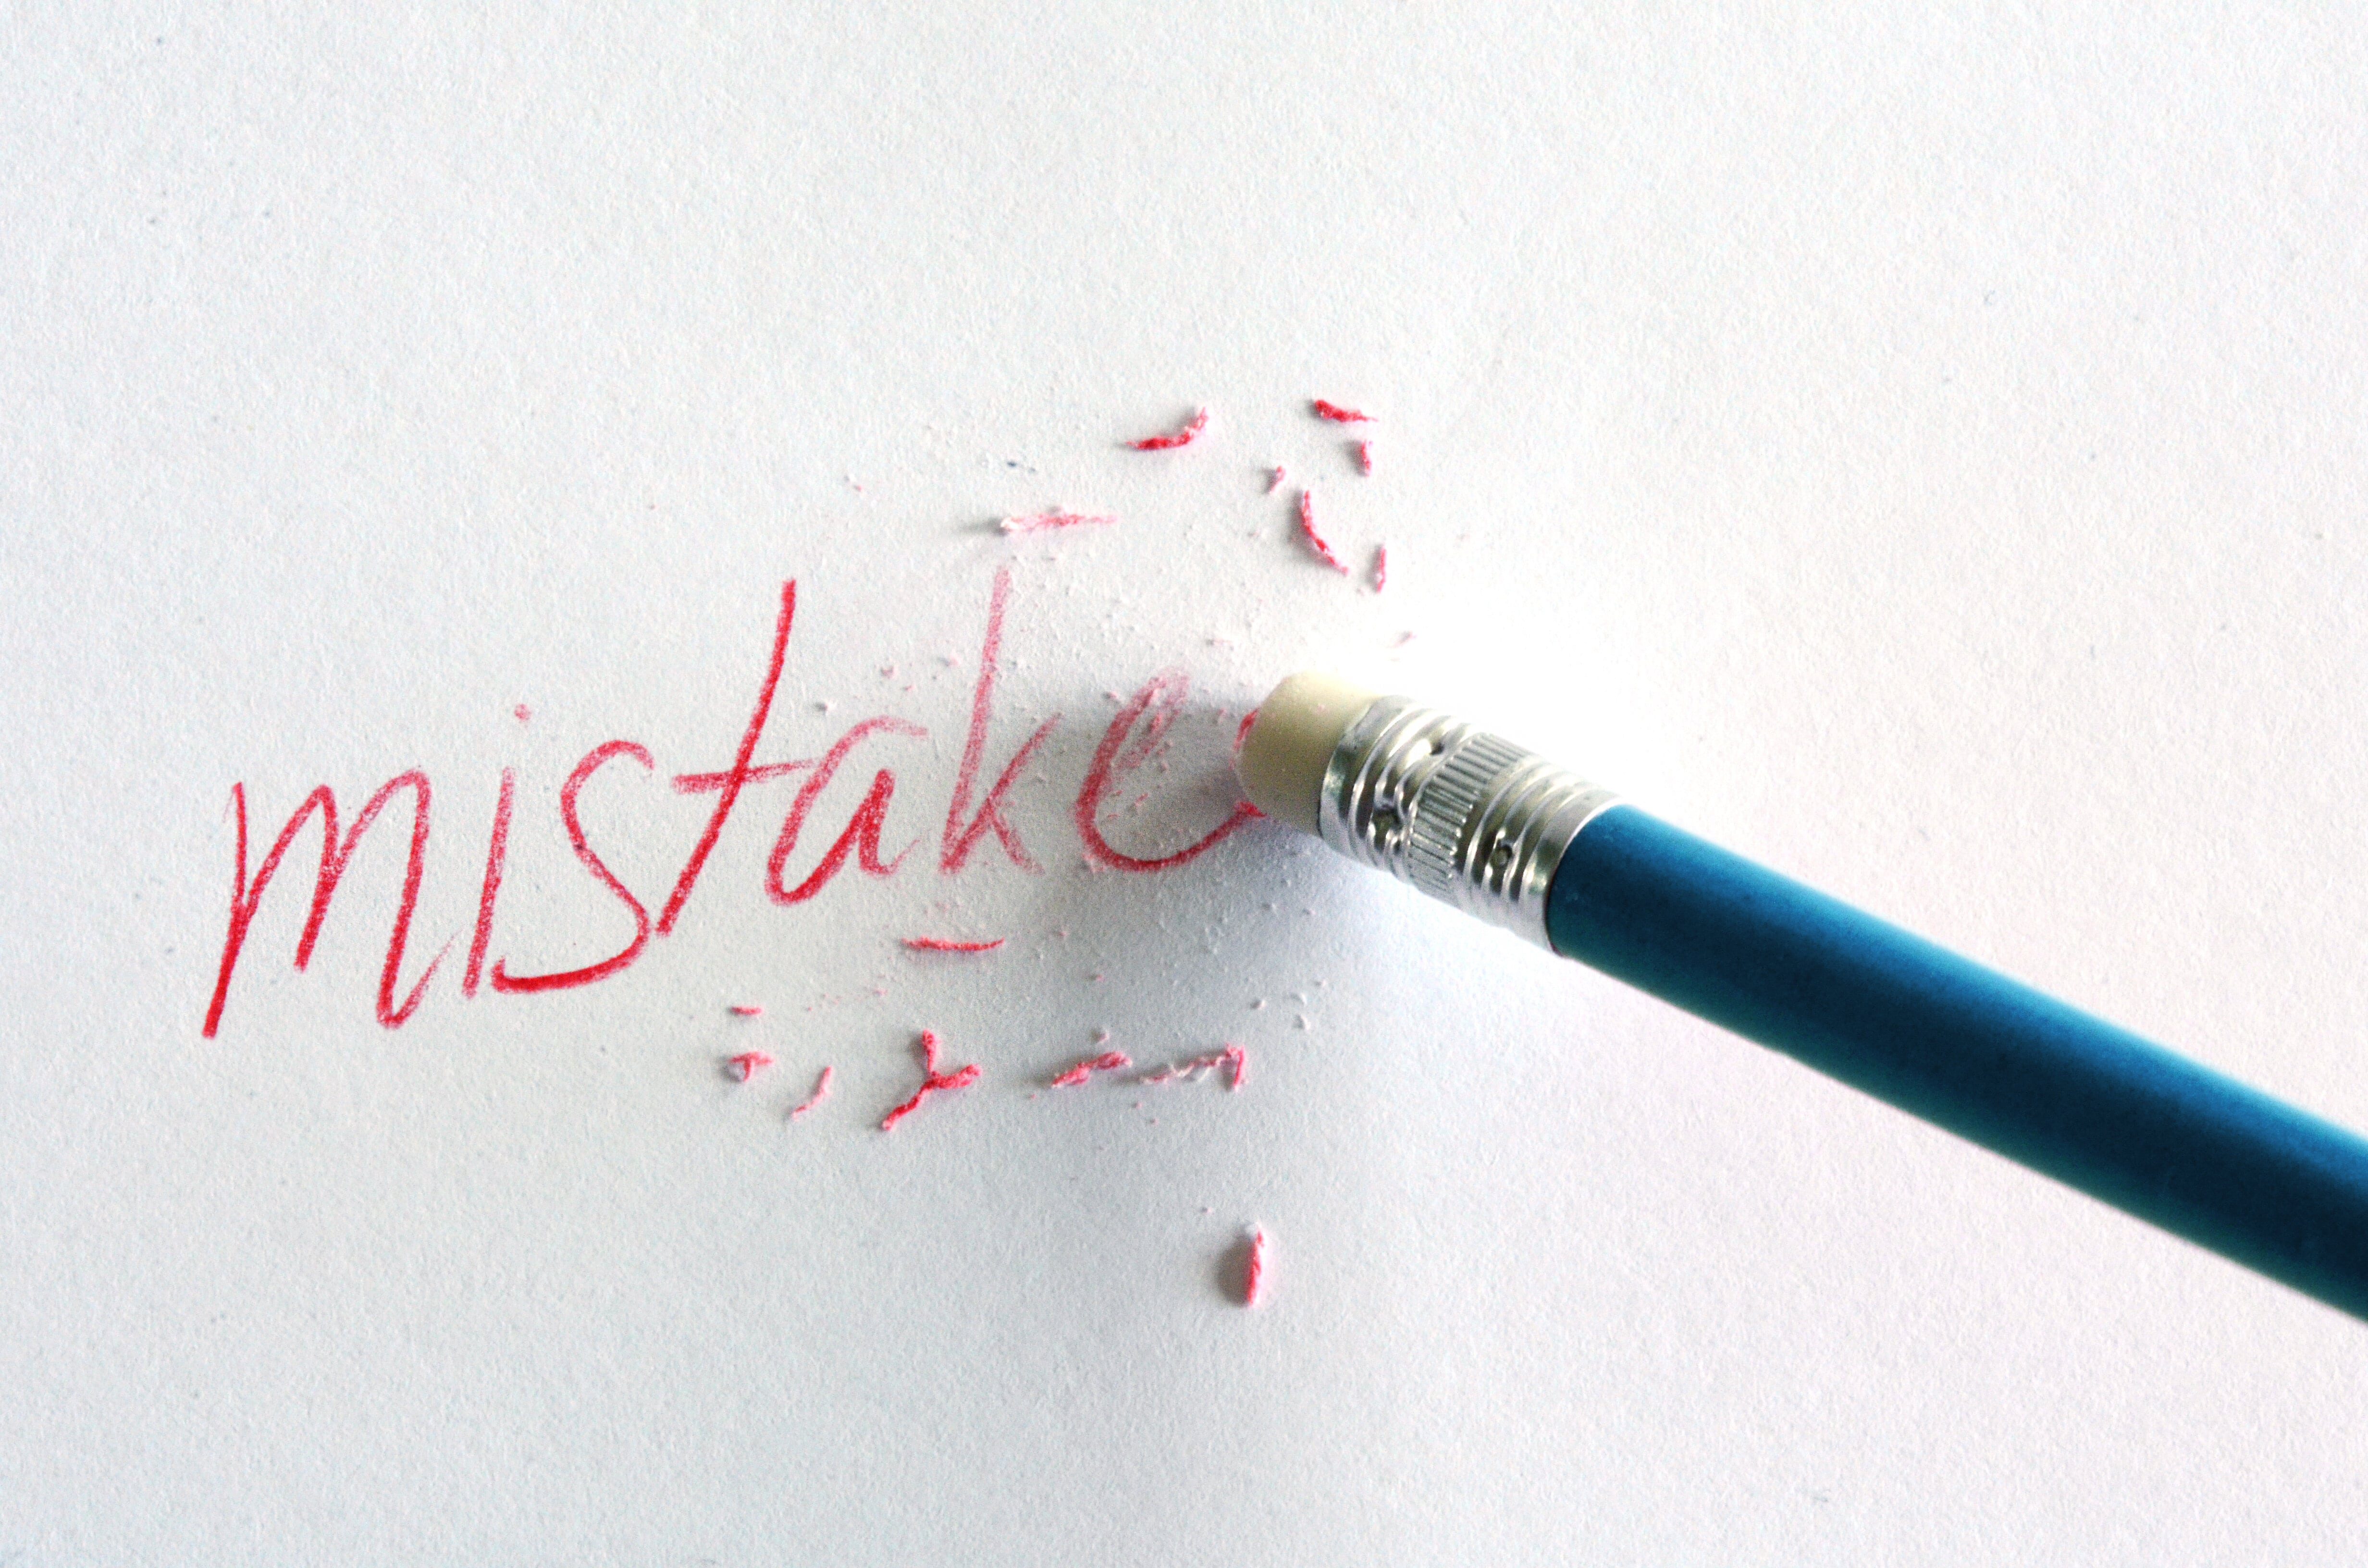 Mistakes Happen: Here’s how to Bounce Back